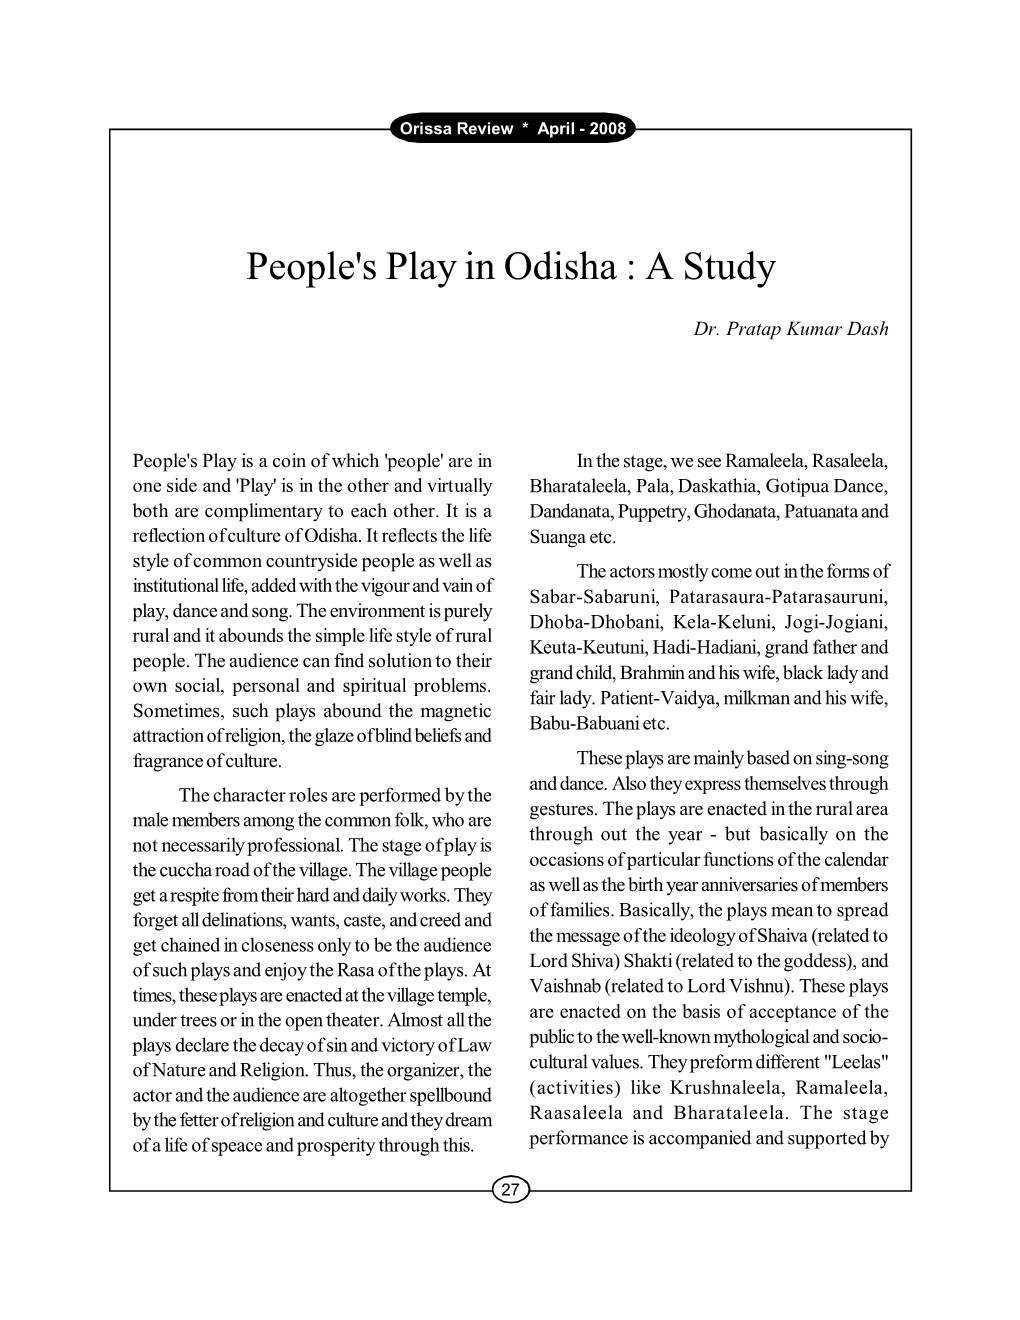 People's Play in Odisha : a Study